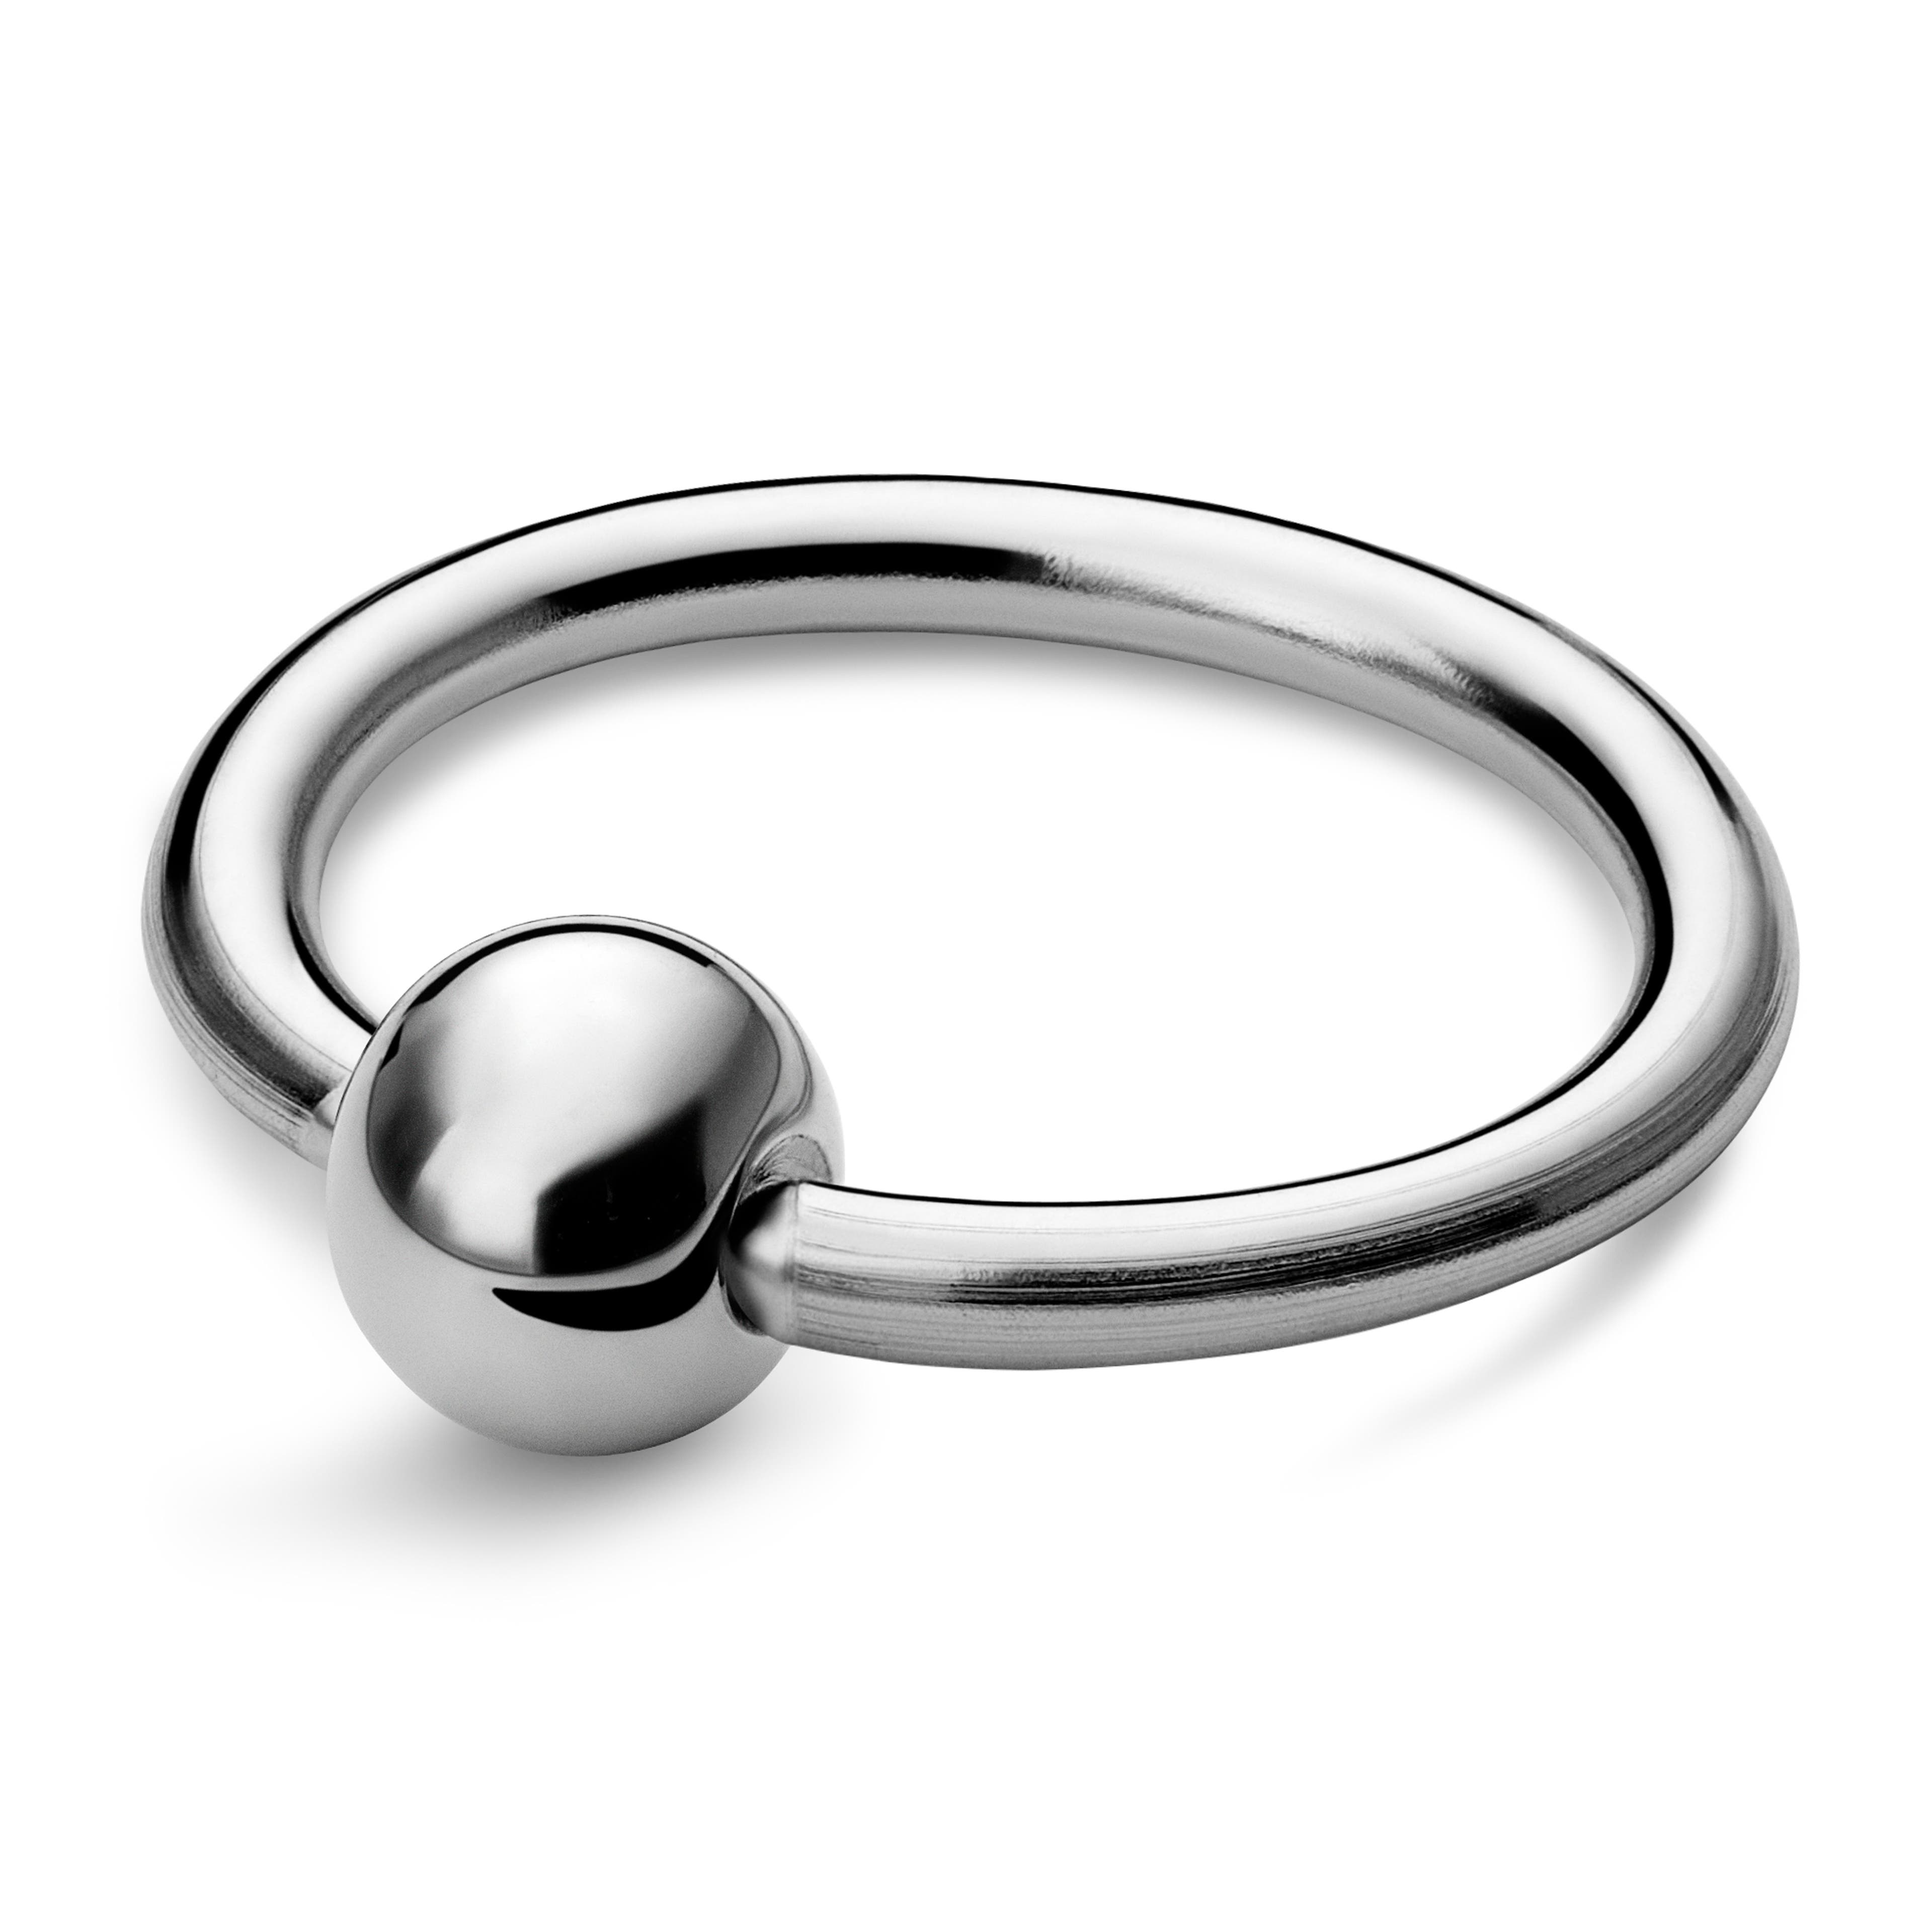 3/8" (10 mm) Silver-Tone Surgical Steel Captive Bead Ring